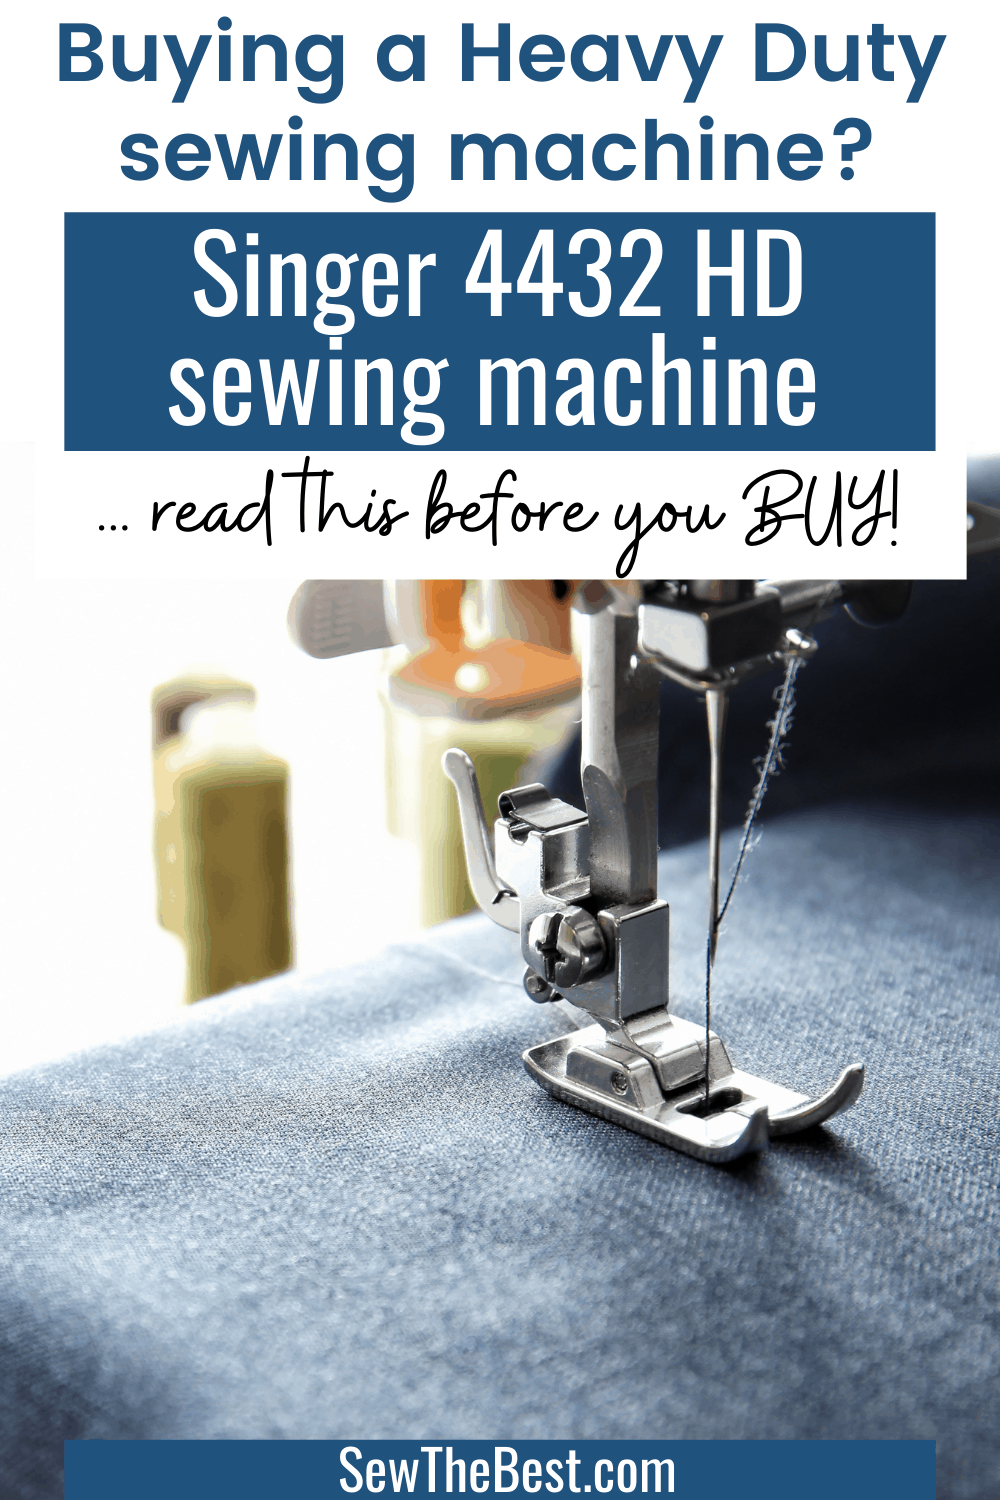 Buying a heavy duty sewing machine and wondering which one is best? Read this Singer heavy duty 4432 review before you buy! Learn all about the Singer 4432 heavy duty sewing machine and find out if it's right for you. #AD #sewingMachine #Sewing